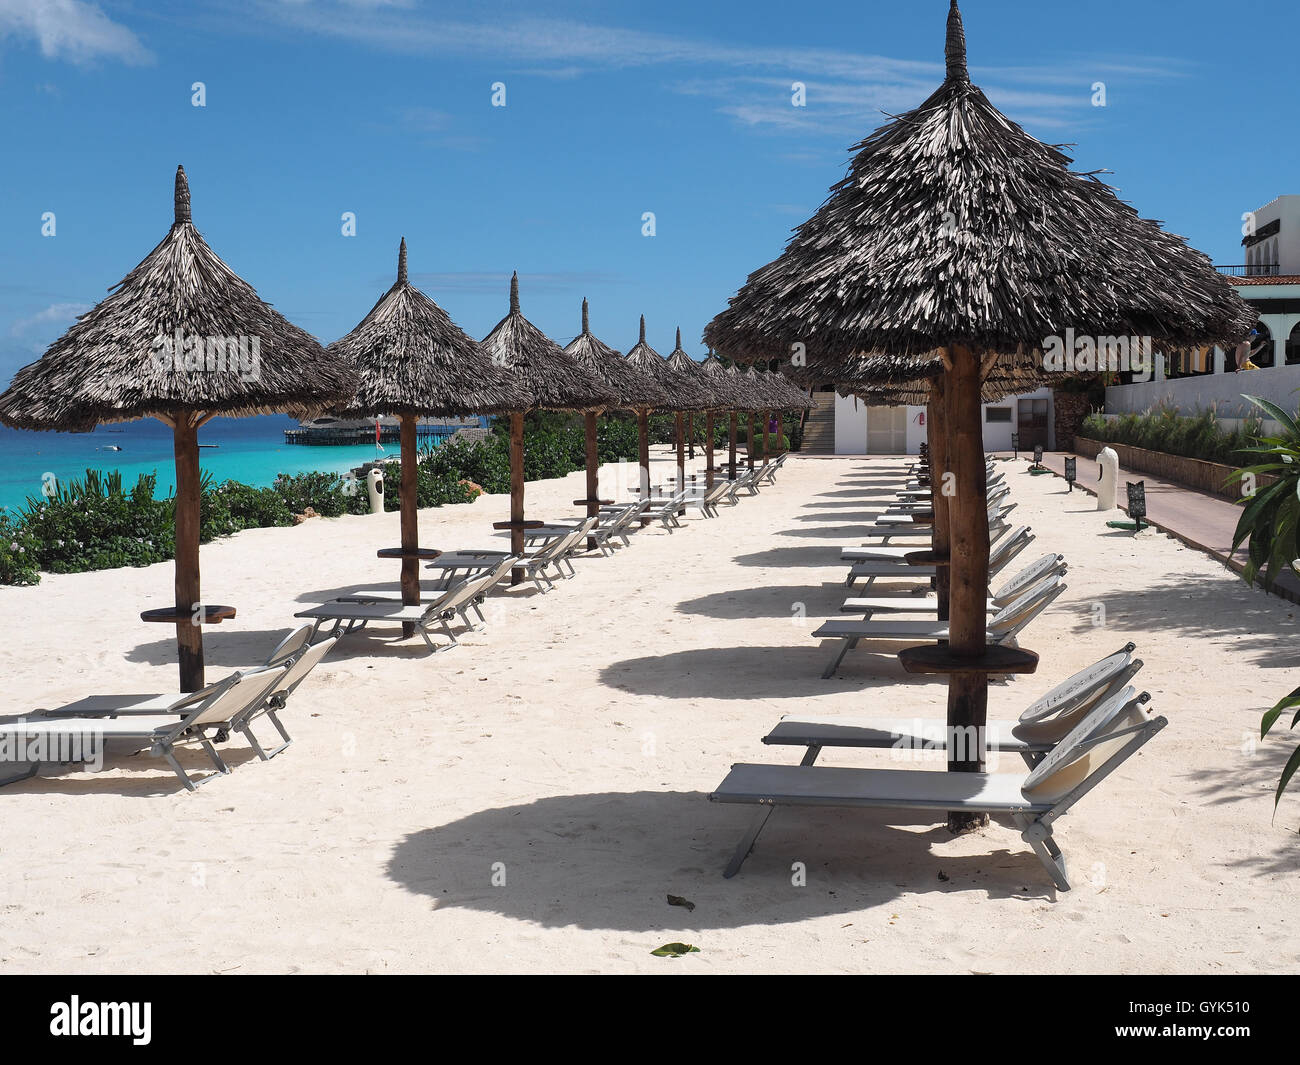 View along a row of thatched sun shade umbrellas on a white sandy beach against a bright blue sky Stock Photo